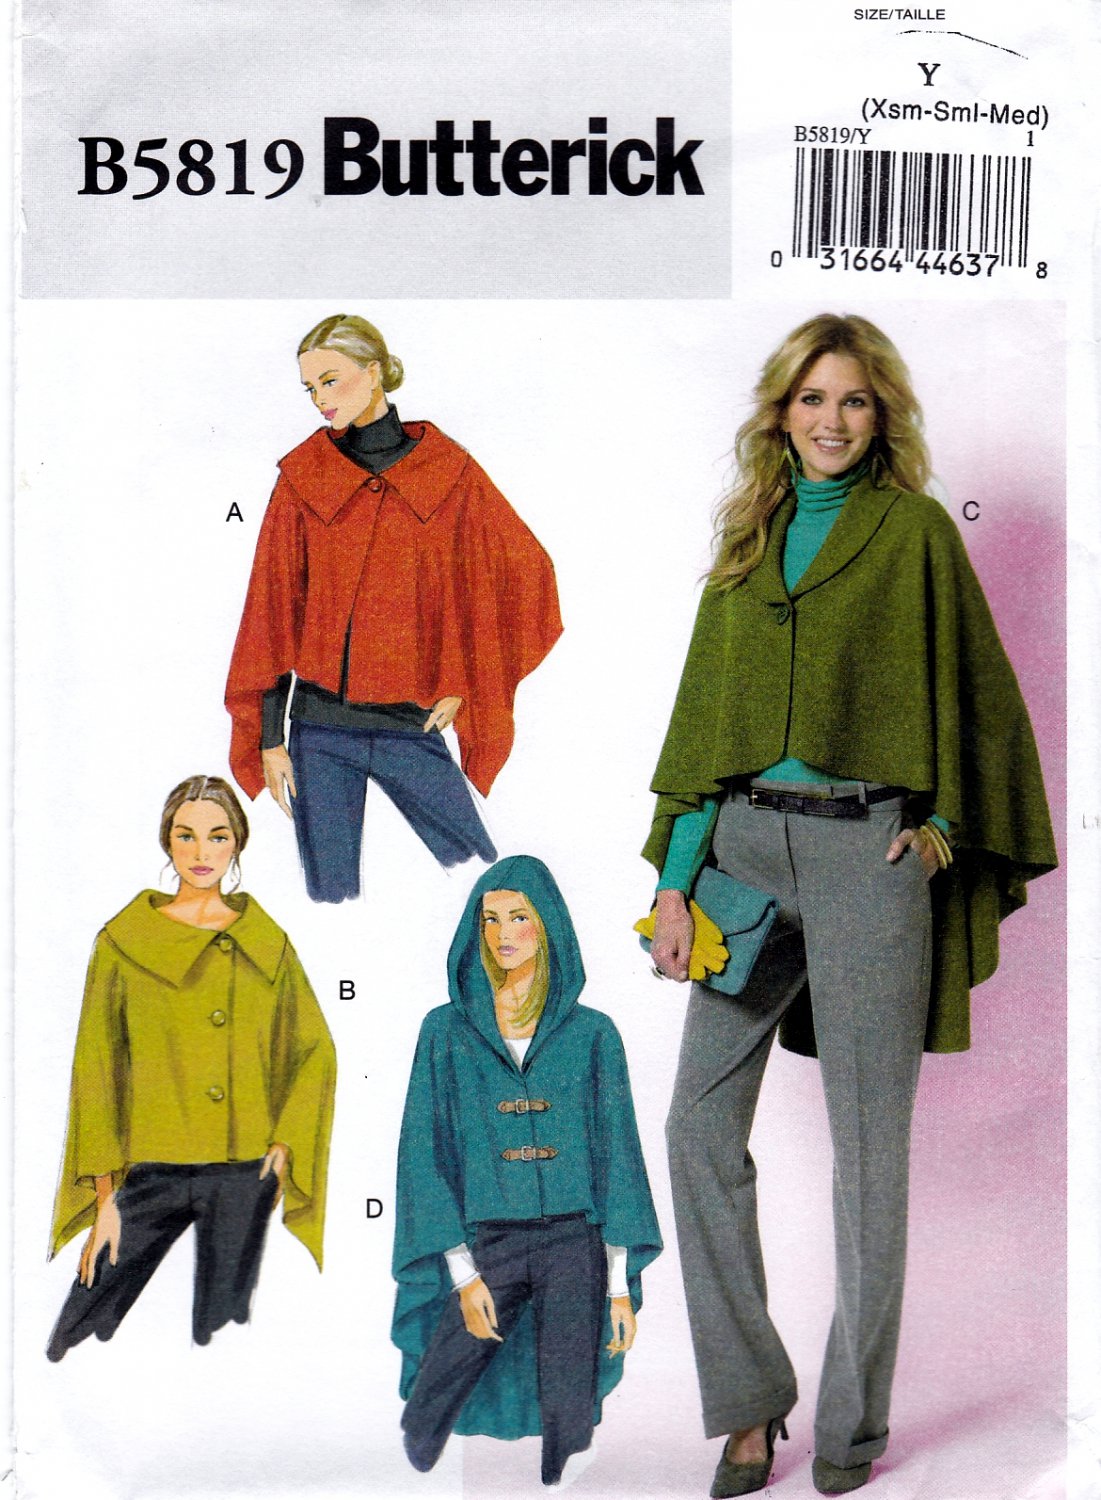 Butterick B5819 Misses Wrap and Cape Hood or Collar Sewing Pattern Sizes Xsm-Sml-Med